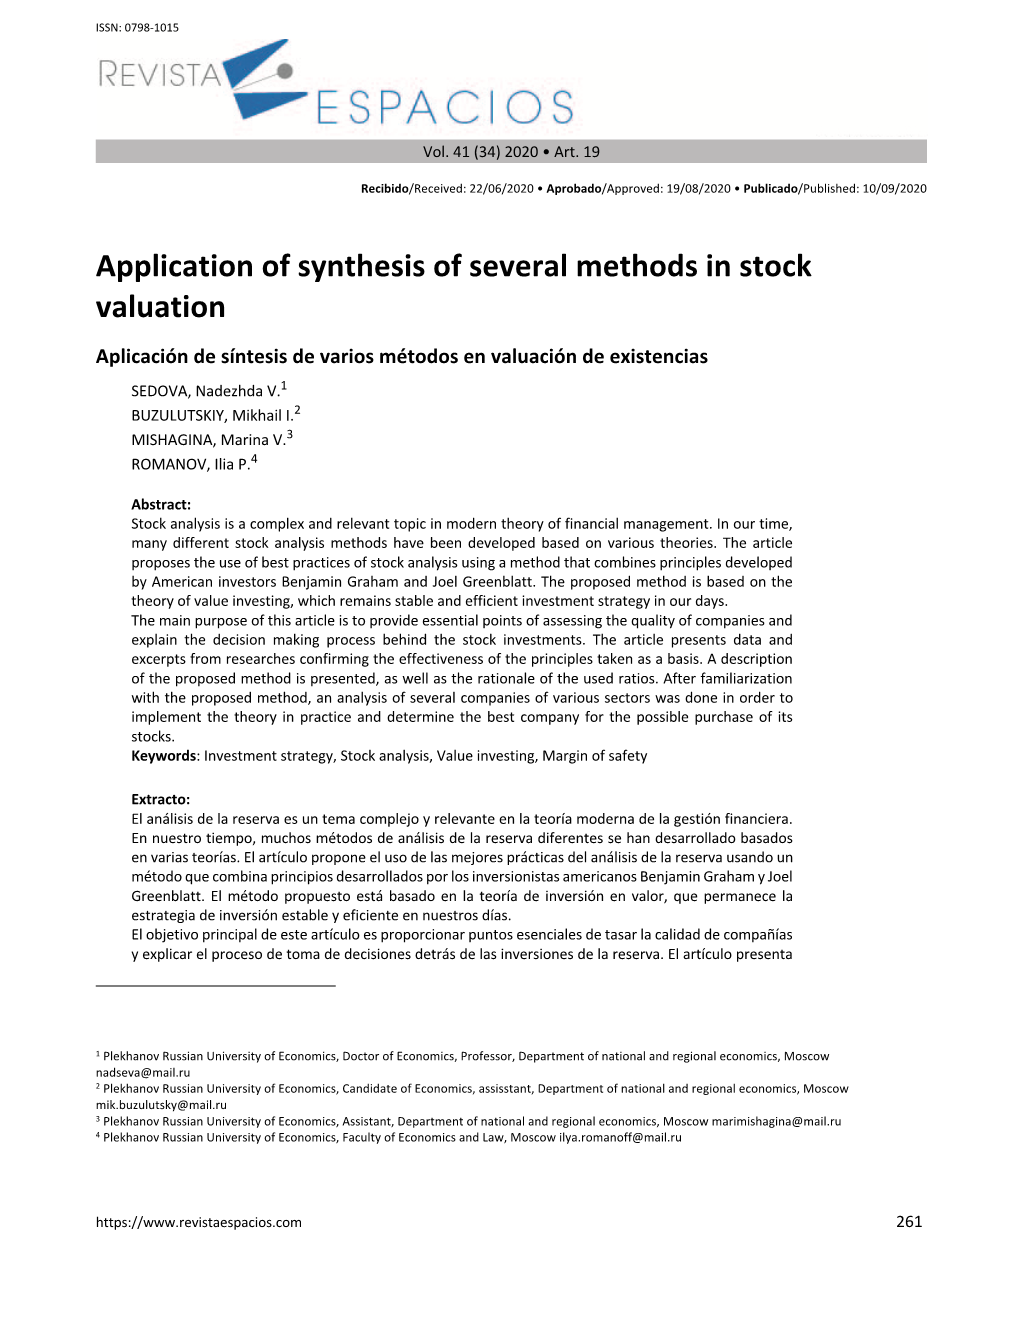 Application of Synthesis of Several Methods in Stock Valuation